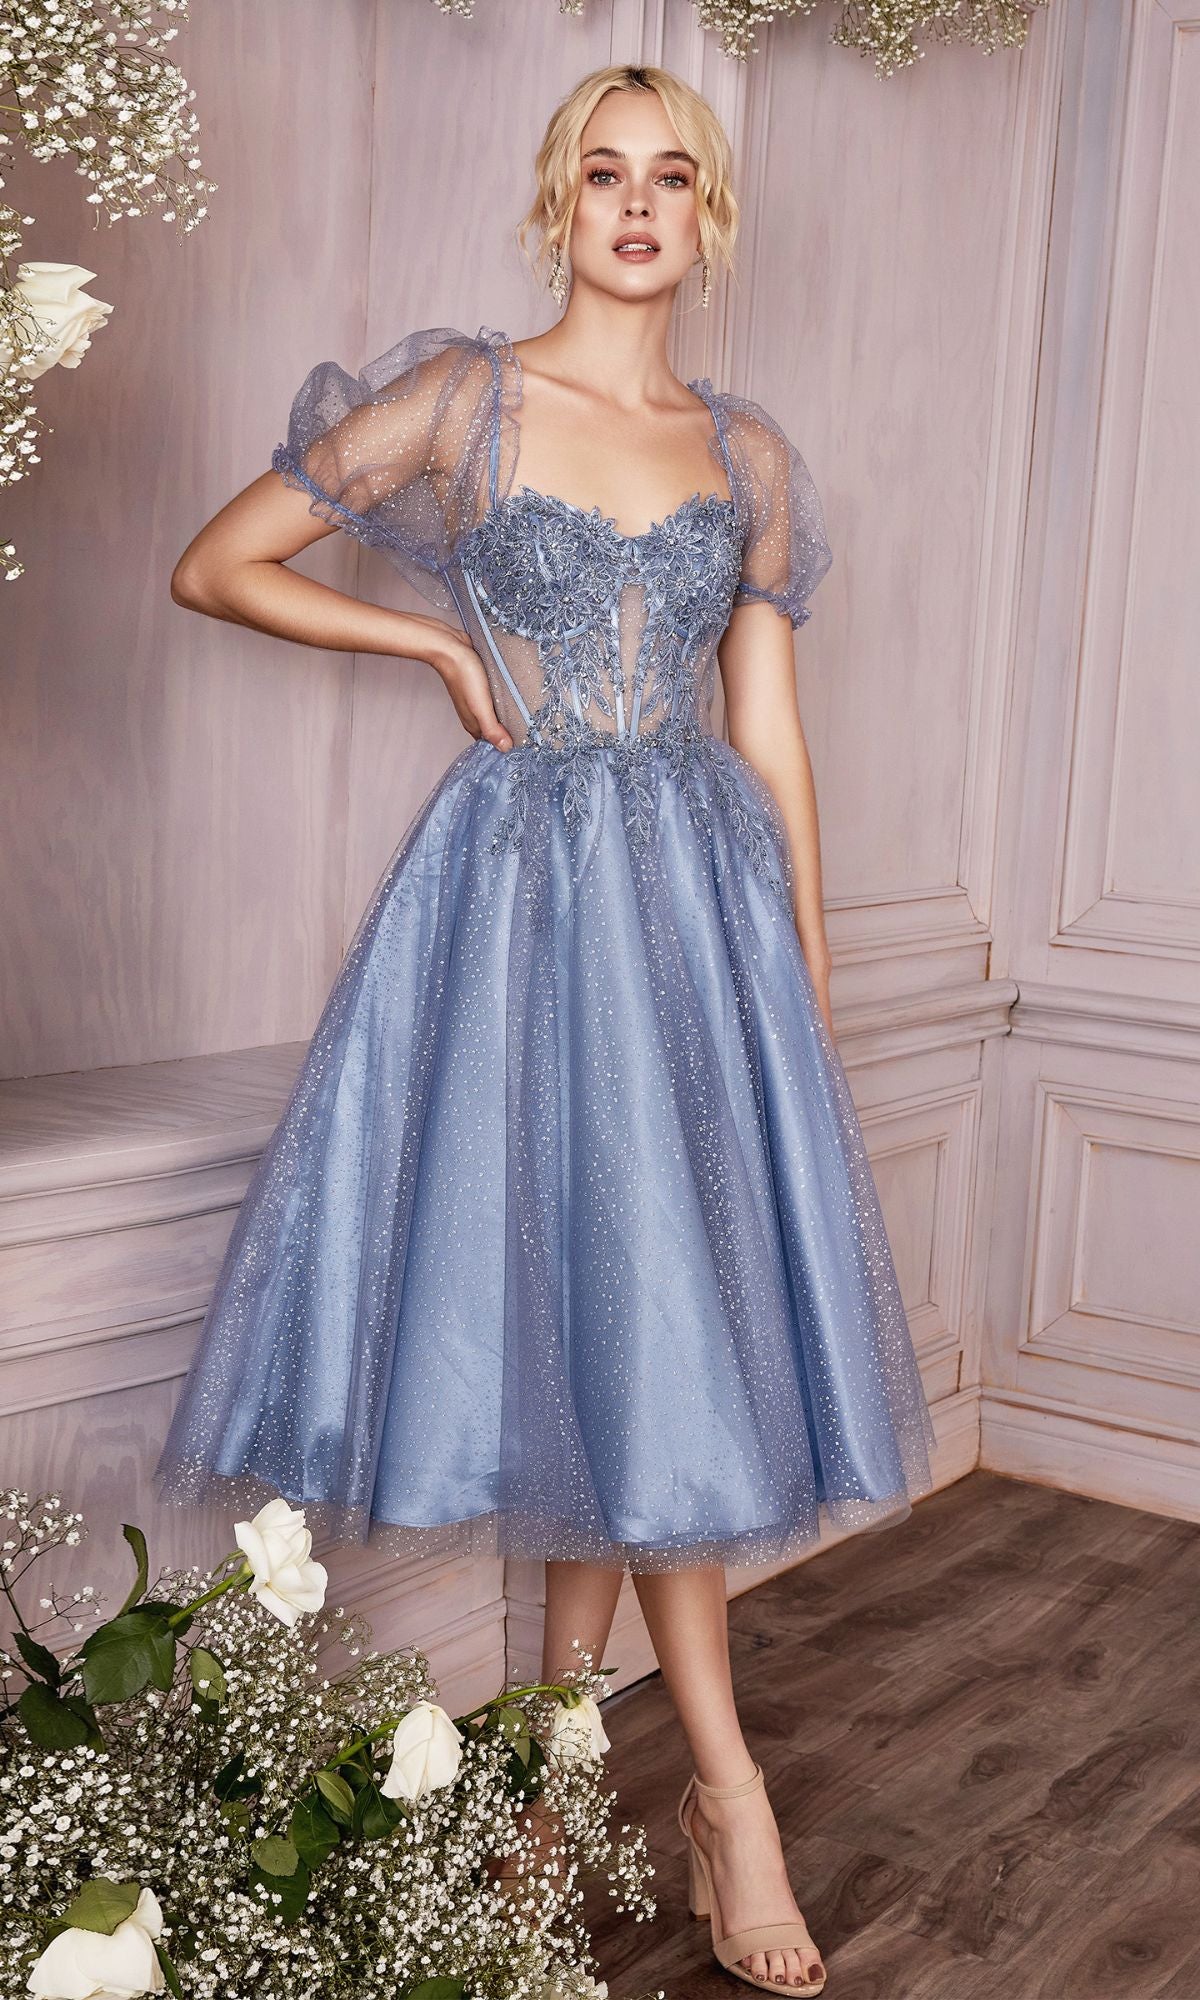 Smoky Blue Short Party Dress CD0187 by Ladivine